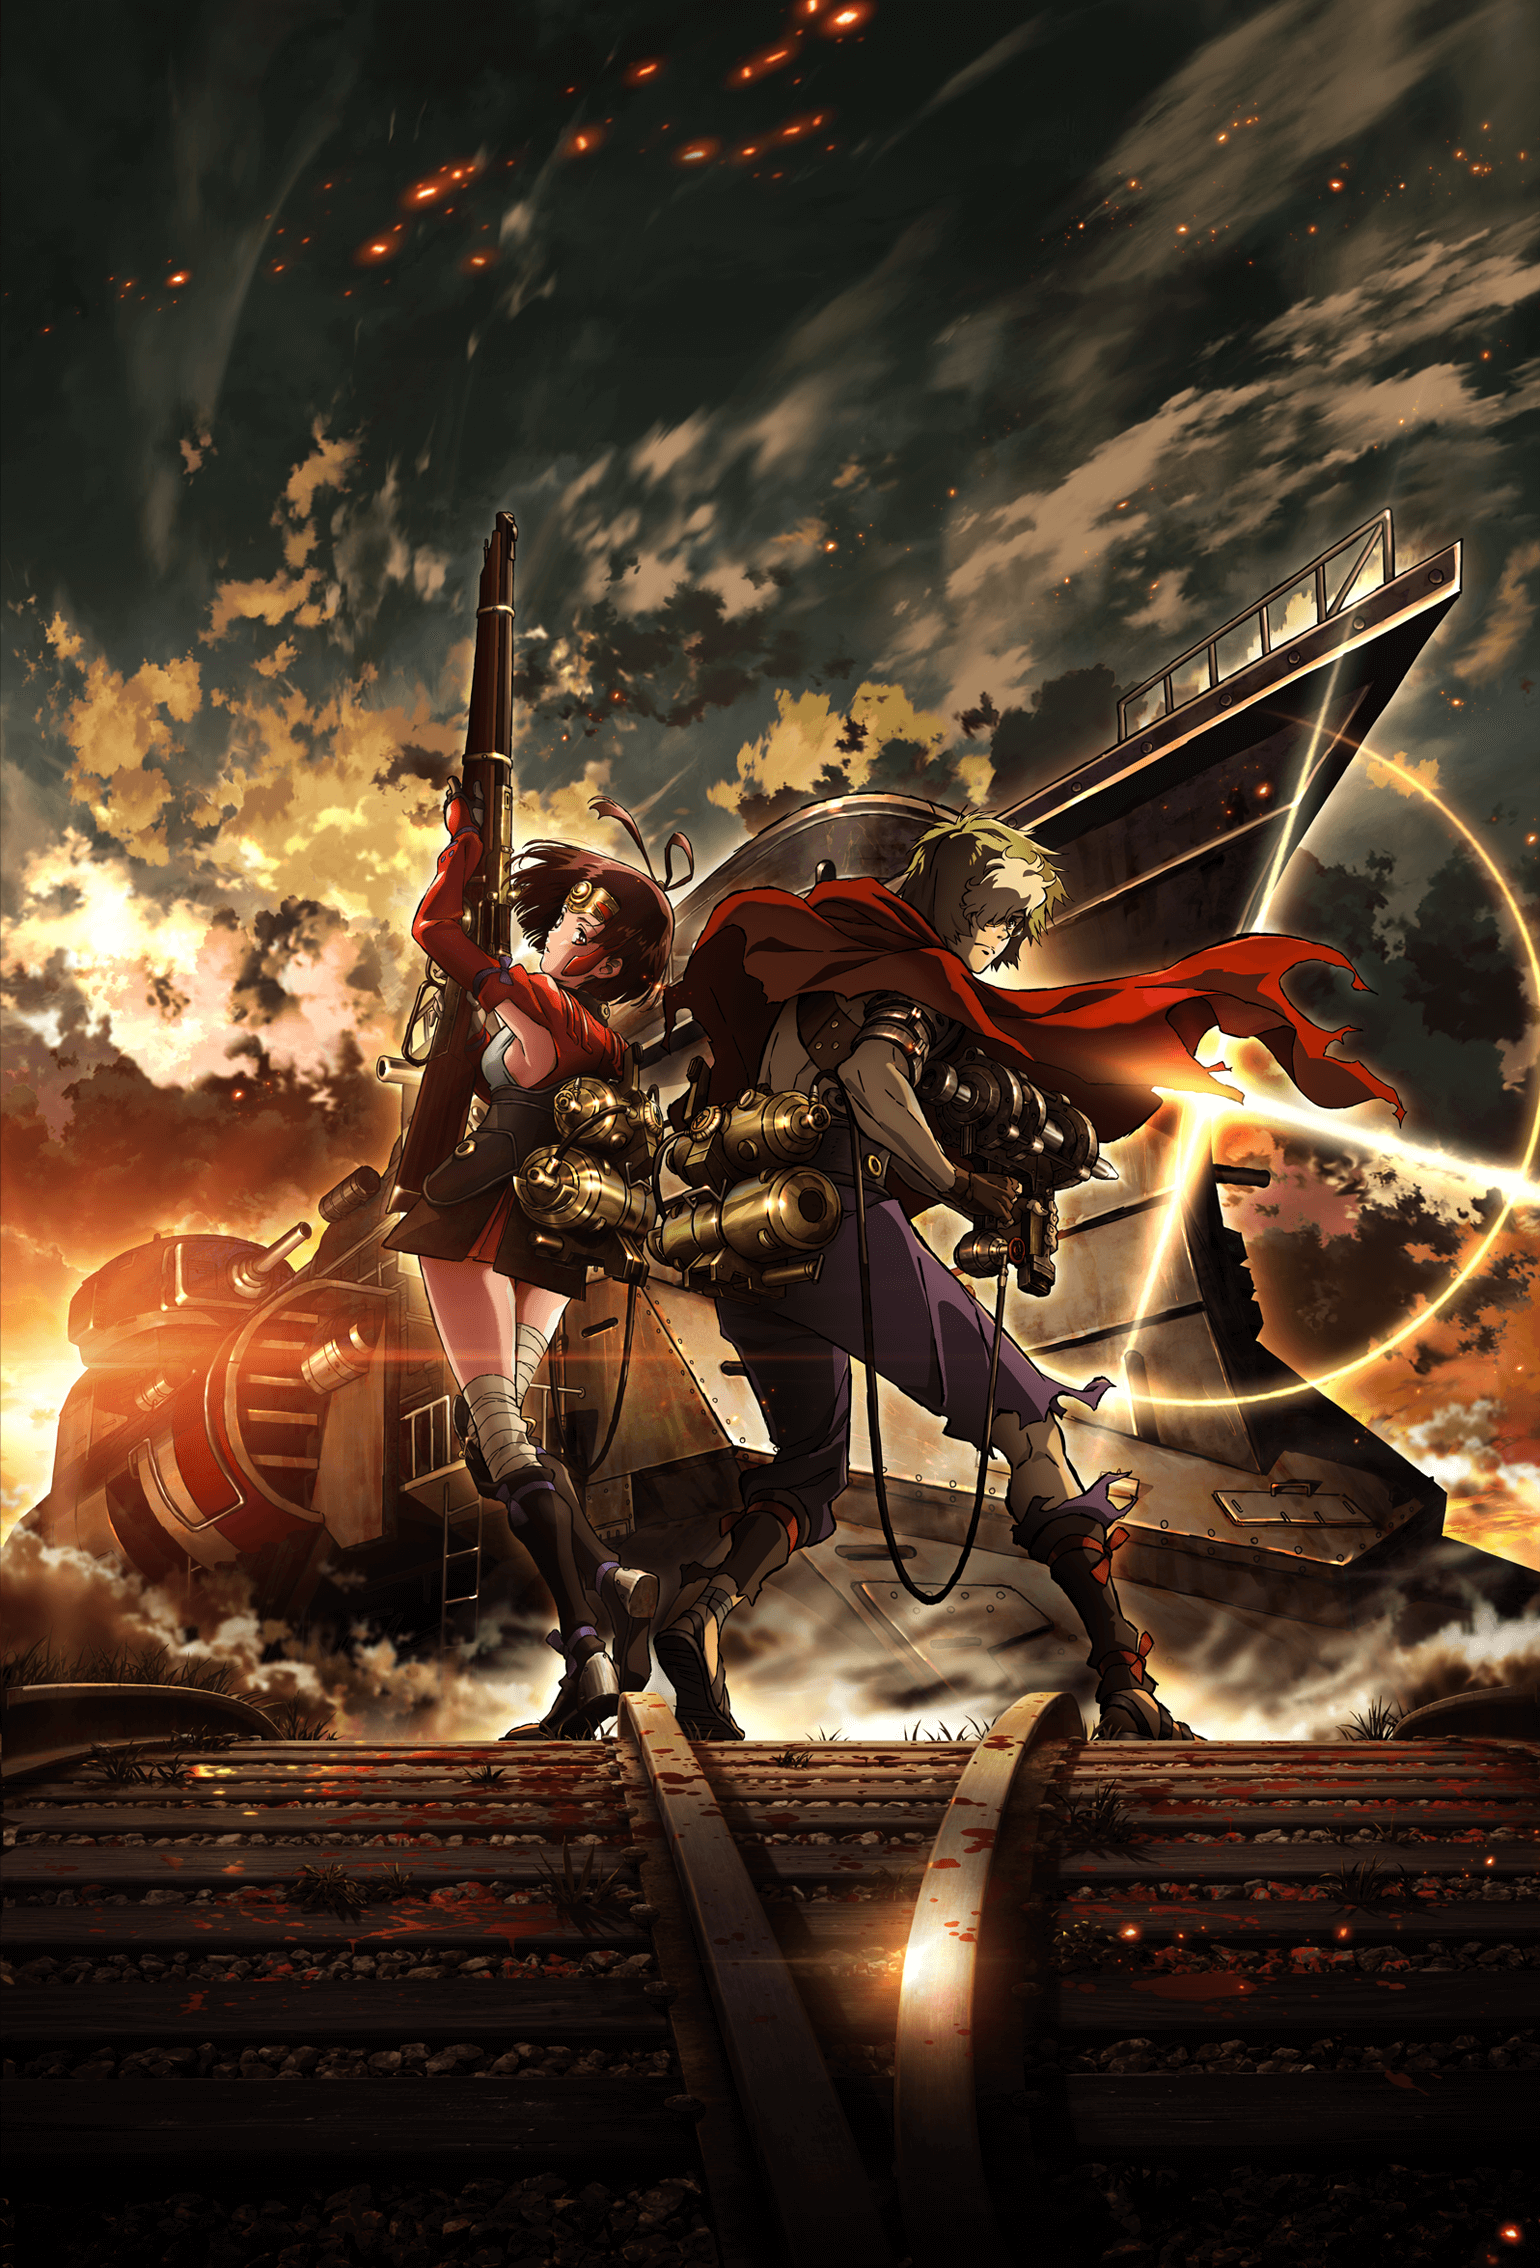 Anime Kabaneri of the Iron Fortress HD Wallpaper by Zephx